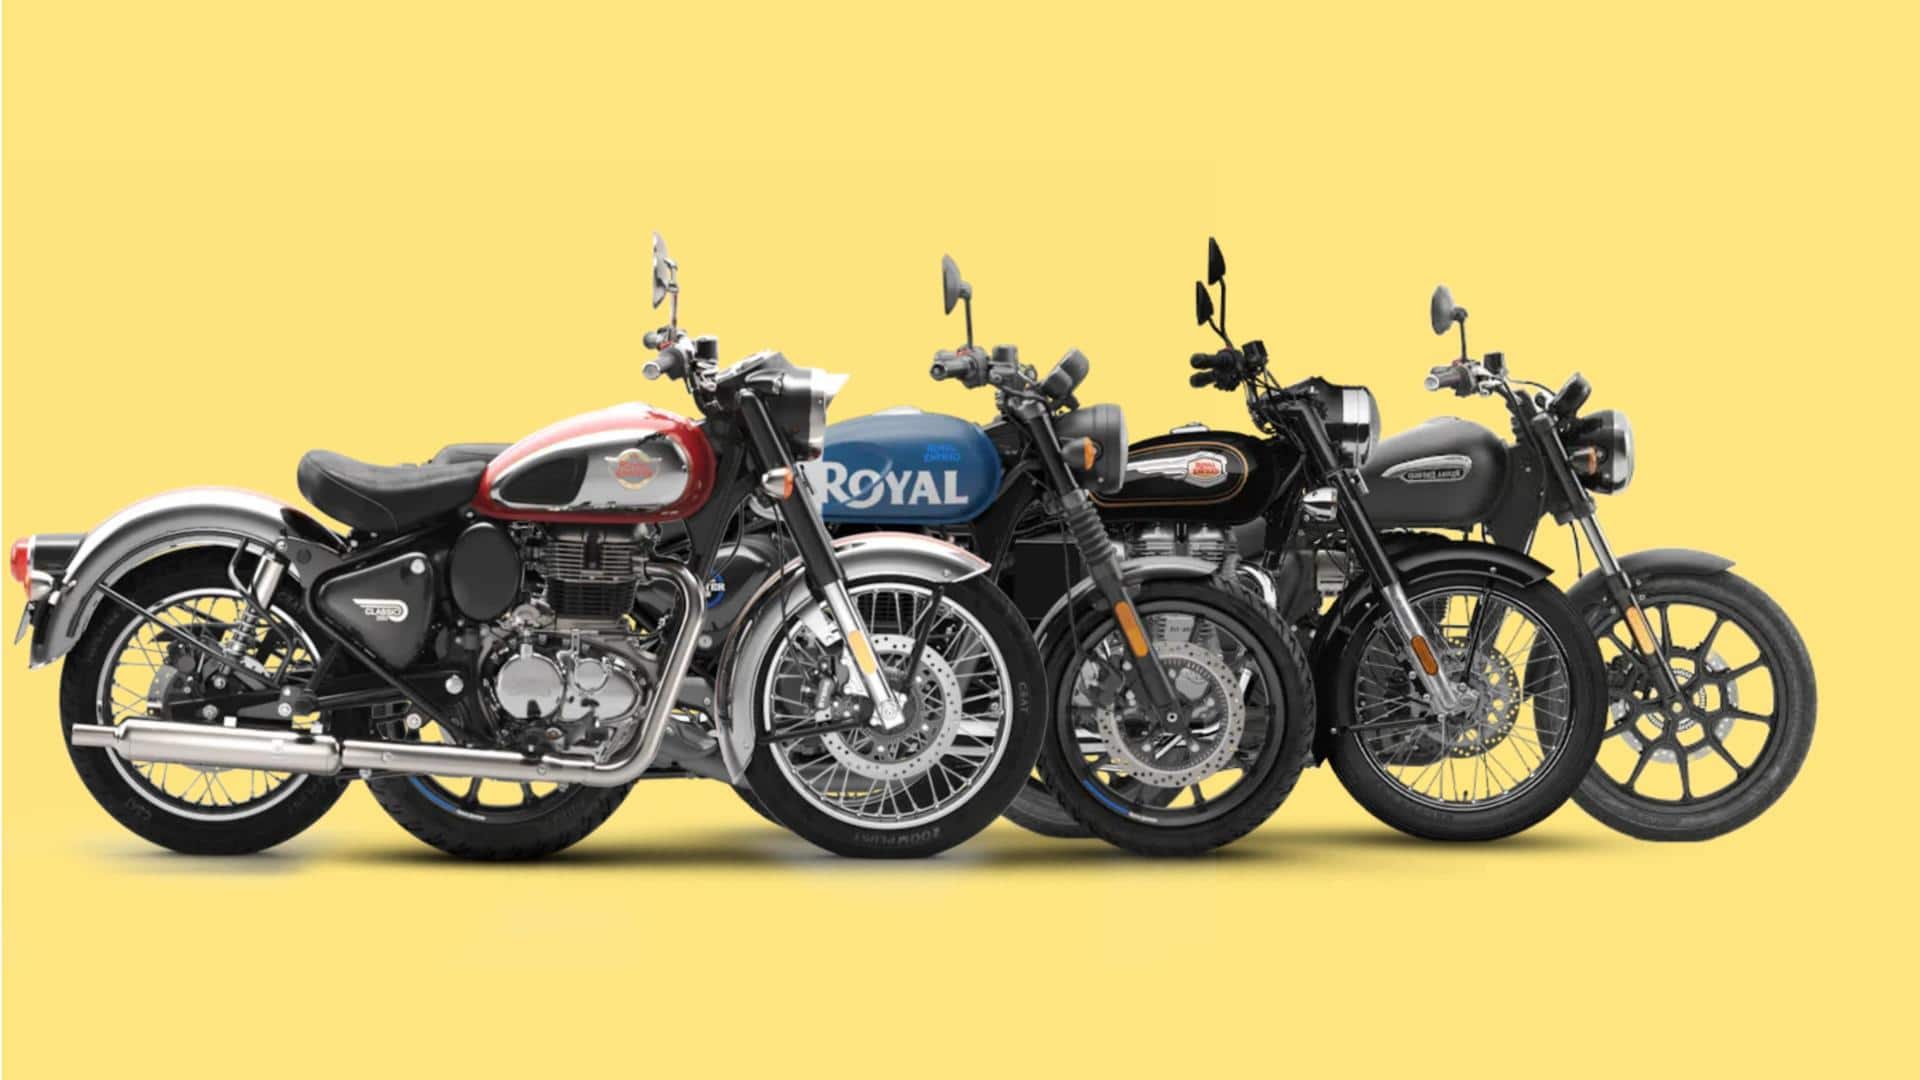 4 of 5 top-selling 200-500cc motorcycles are from Royal Enfield